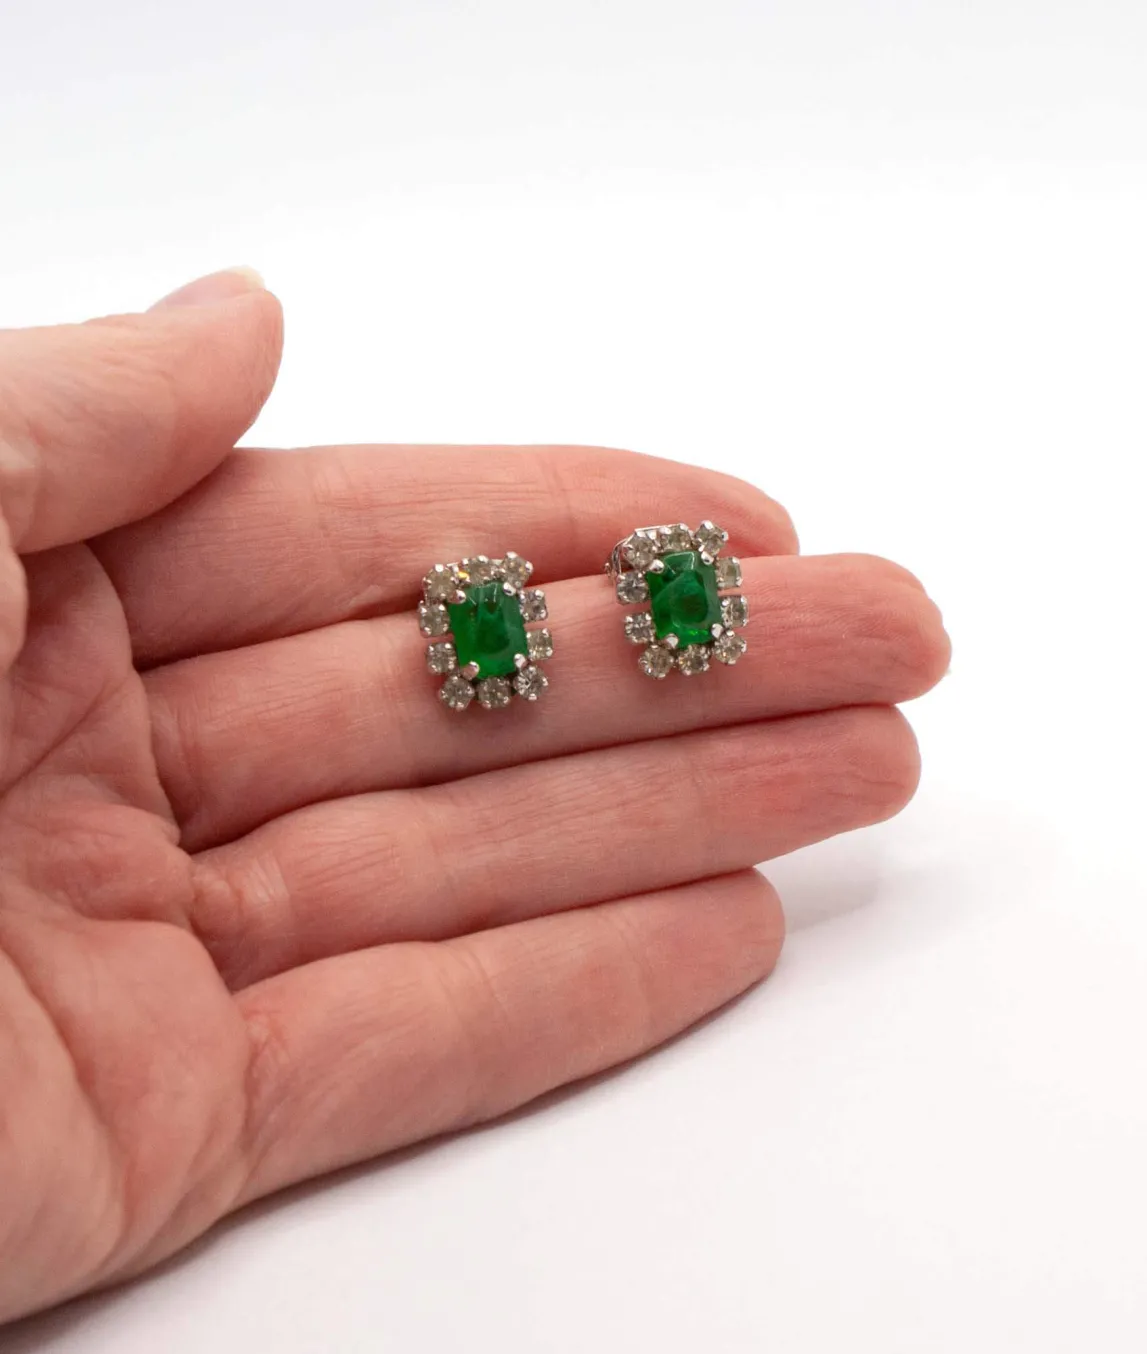 Small green Christian Dior vintage earrings